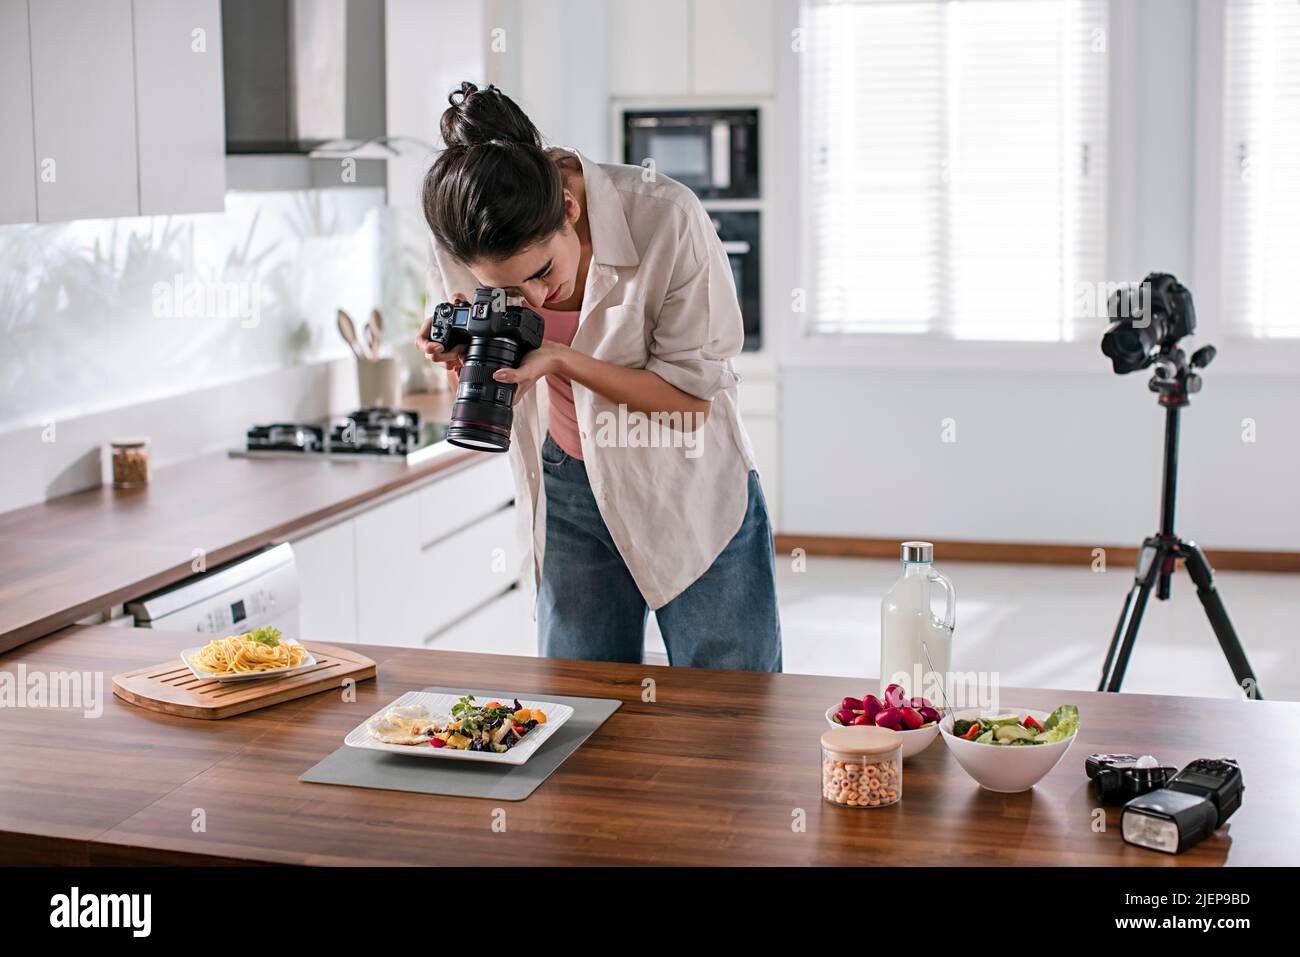 Young woman clicking pictures of food with a camera in the kitchen Stock Photo